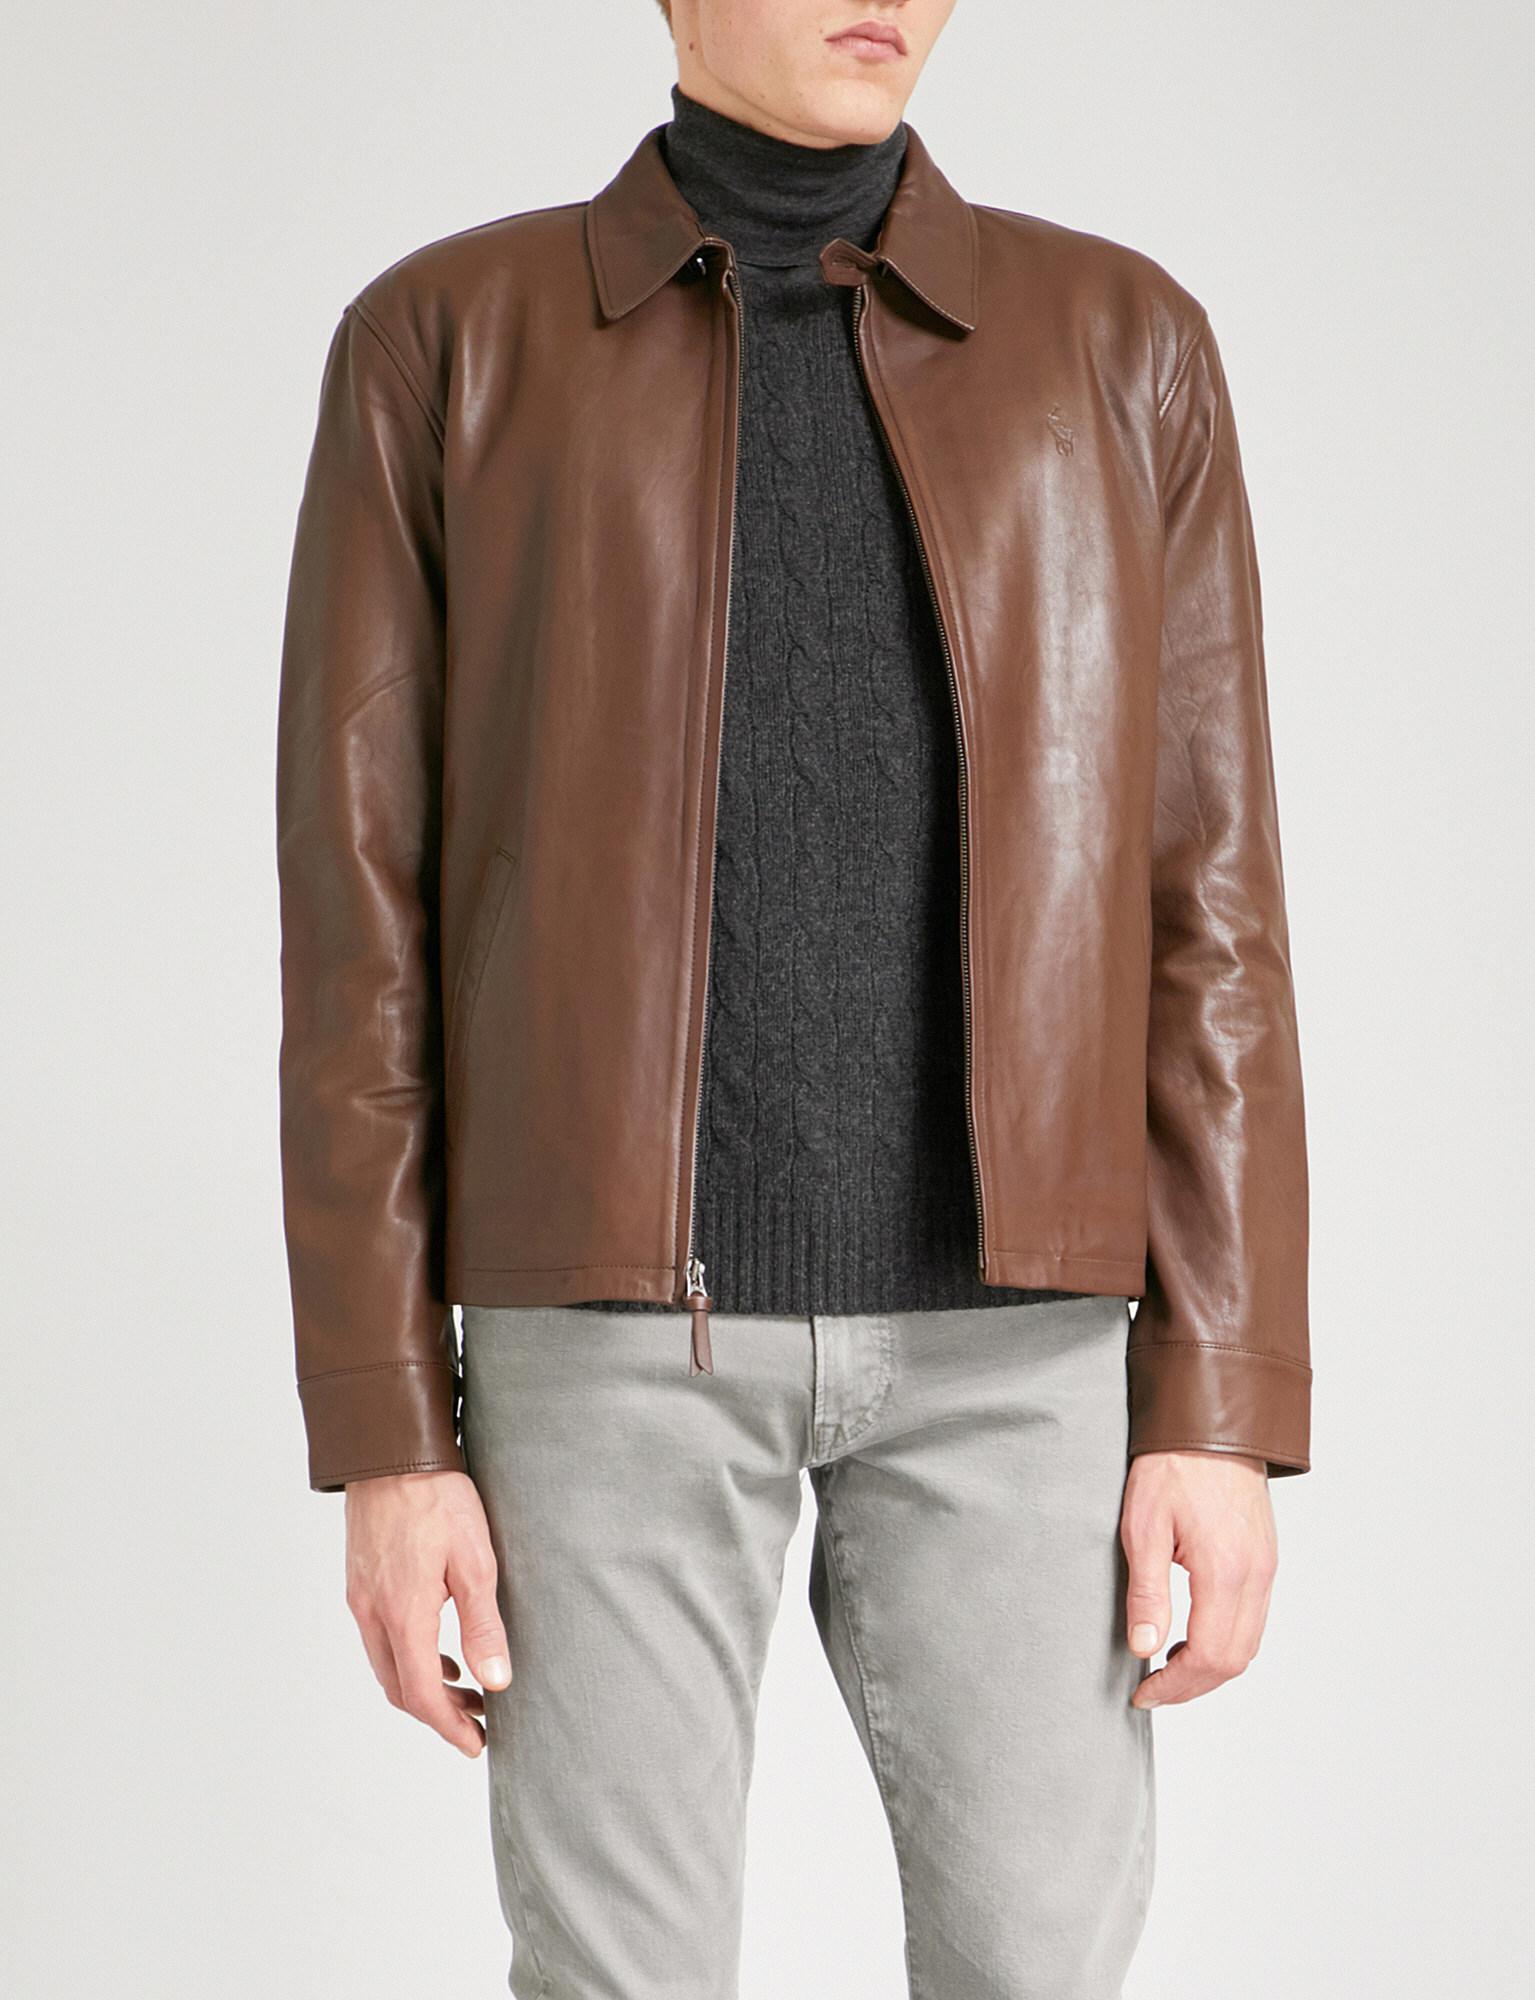 polo by ralph lauren leather jacket